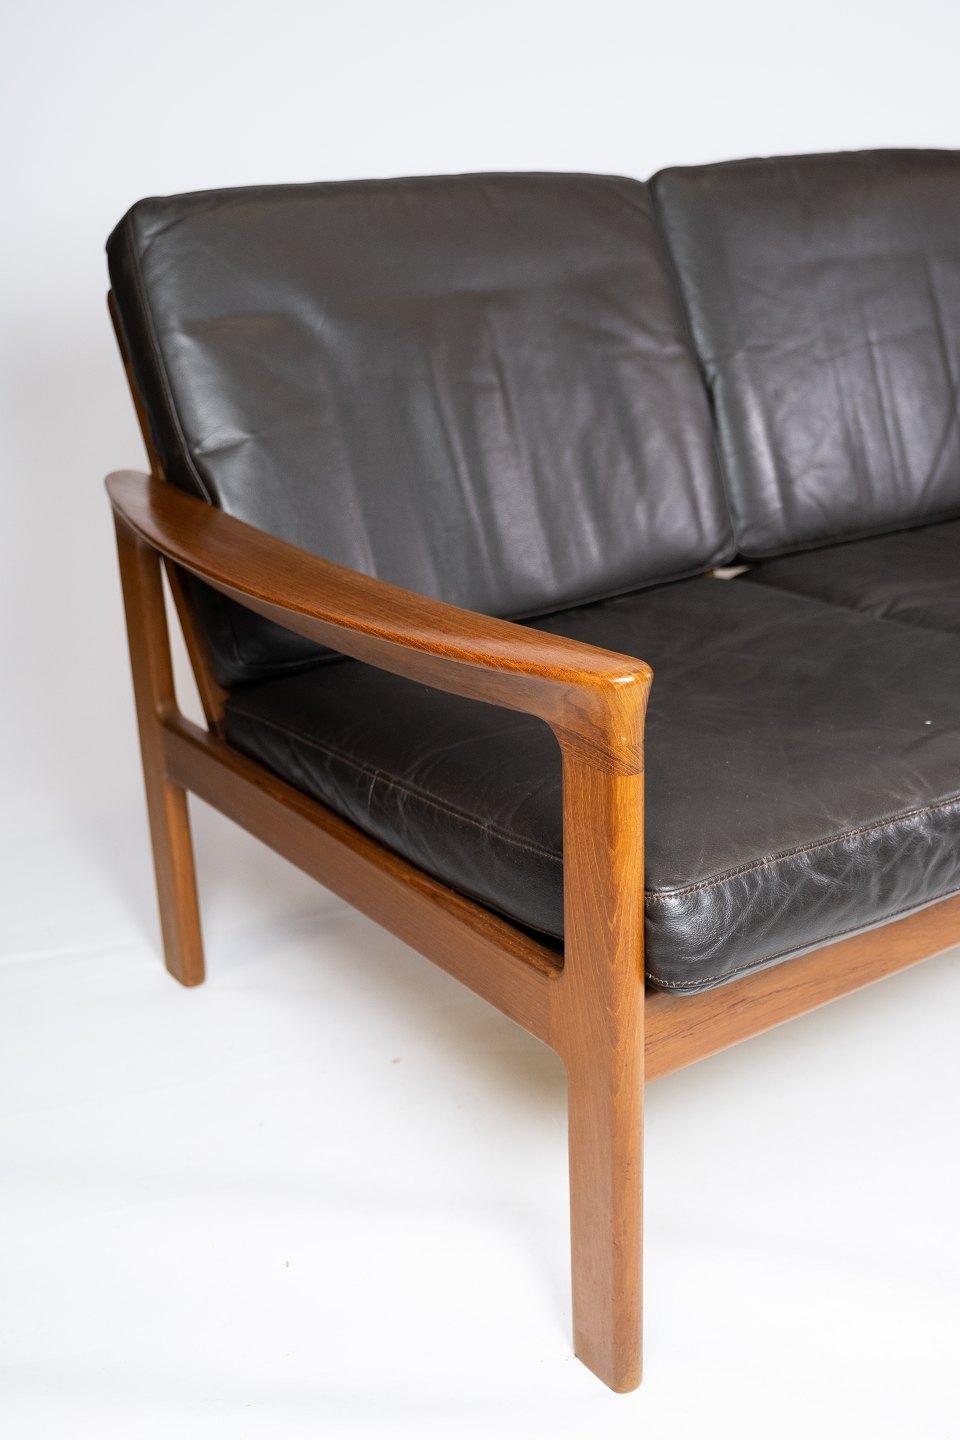 Mid-Century Modern Three Seater Sofa in Teak with Black Leather by Arne Vodder In Good Condition For Sale In Lejre, DK